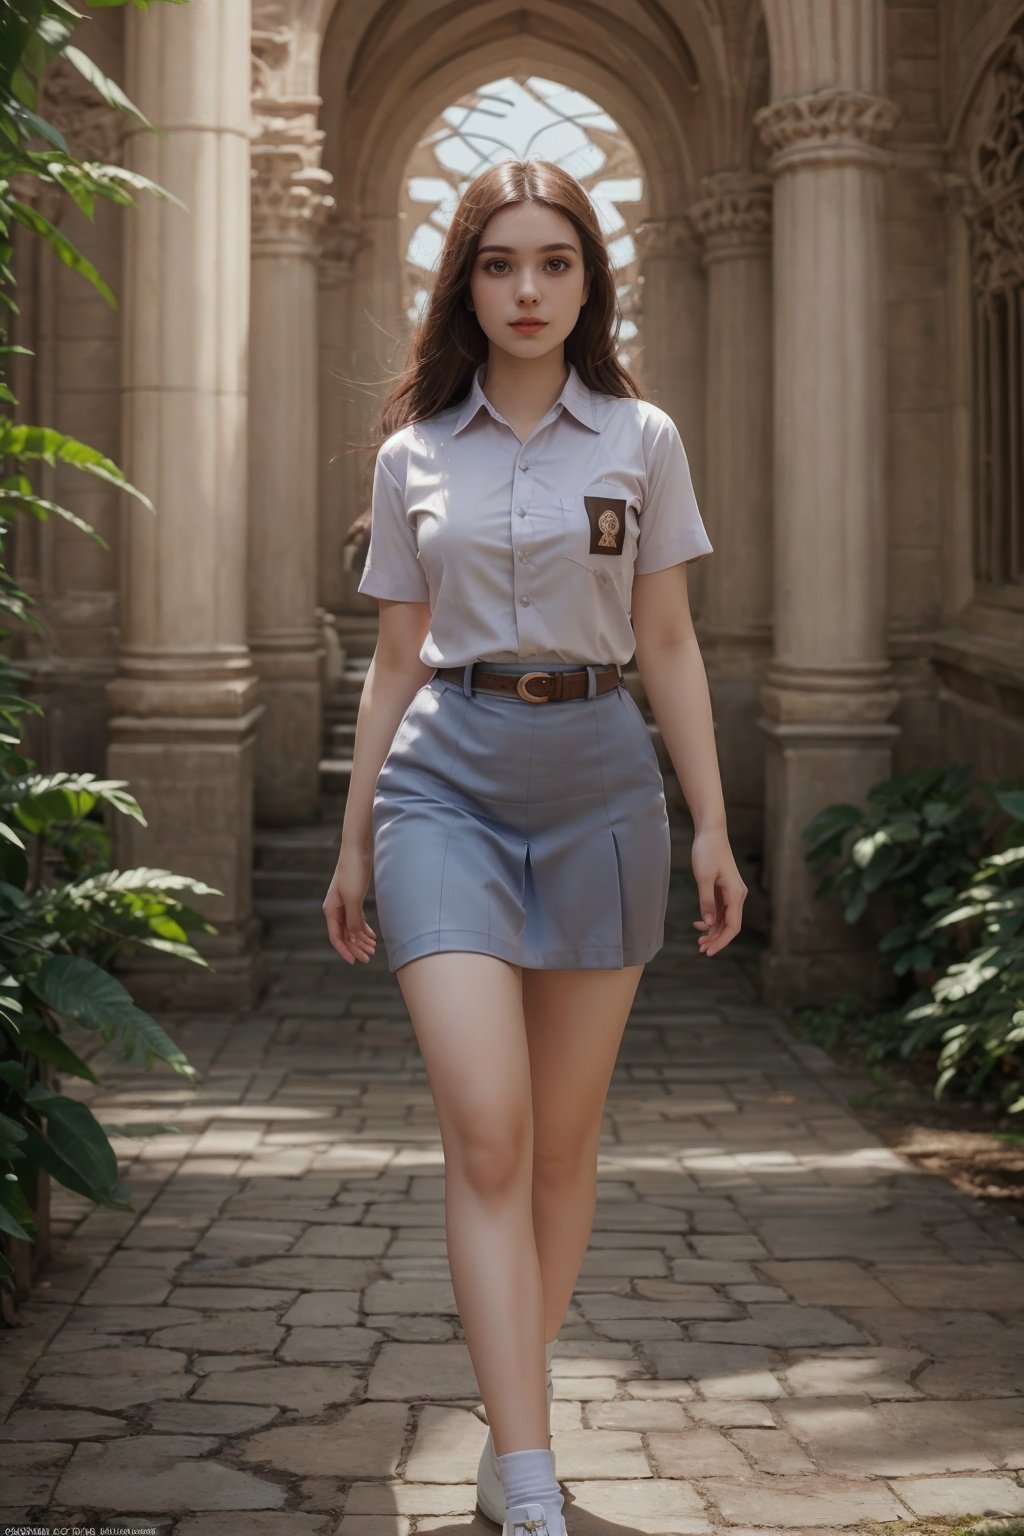 Hyperrealistic art cinematic photo ethereal fantasy concept art of sm4c3w3k, white clothes,full body  photo of the most beautiful bukub woman in the world wearing the sm4c3w3k, collared shirt,short sleeves, grey skirt, pocket,beautiful face,detail face,<lora:sm4c3w3k-05:0.8>  . magnificent, celestial, ethereal, painterly, epic, majestic, magical, fantasy art, cover art, dreamy . 35mm photograph, film, bokeh, professional, 4k, highly detailed . Extremely high-resolution details, photographic, realism pushed to extreme, fine texture, incredibly lifelike